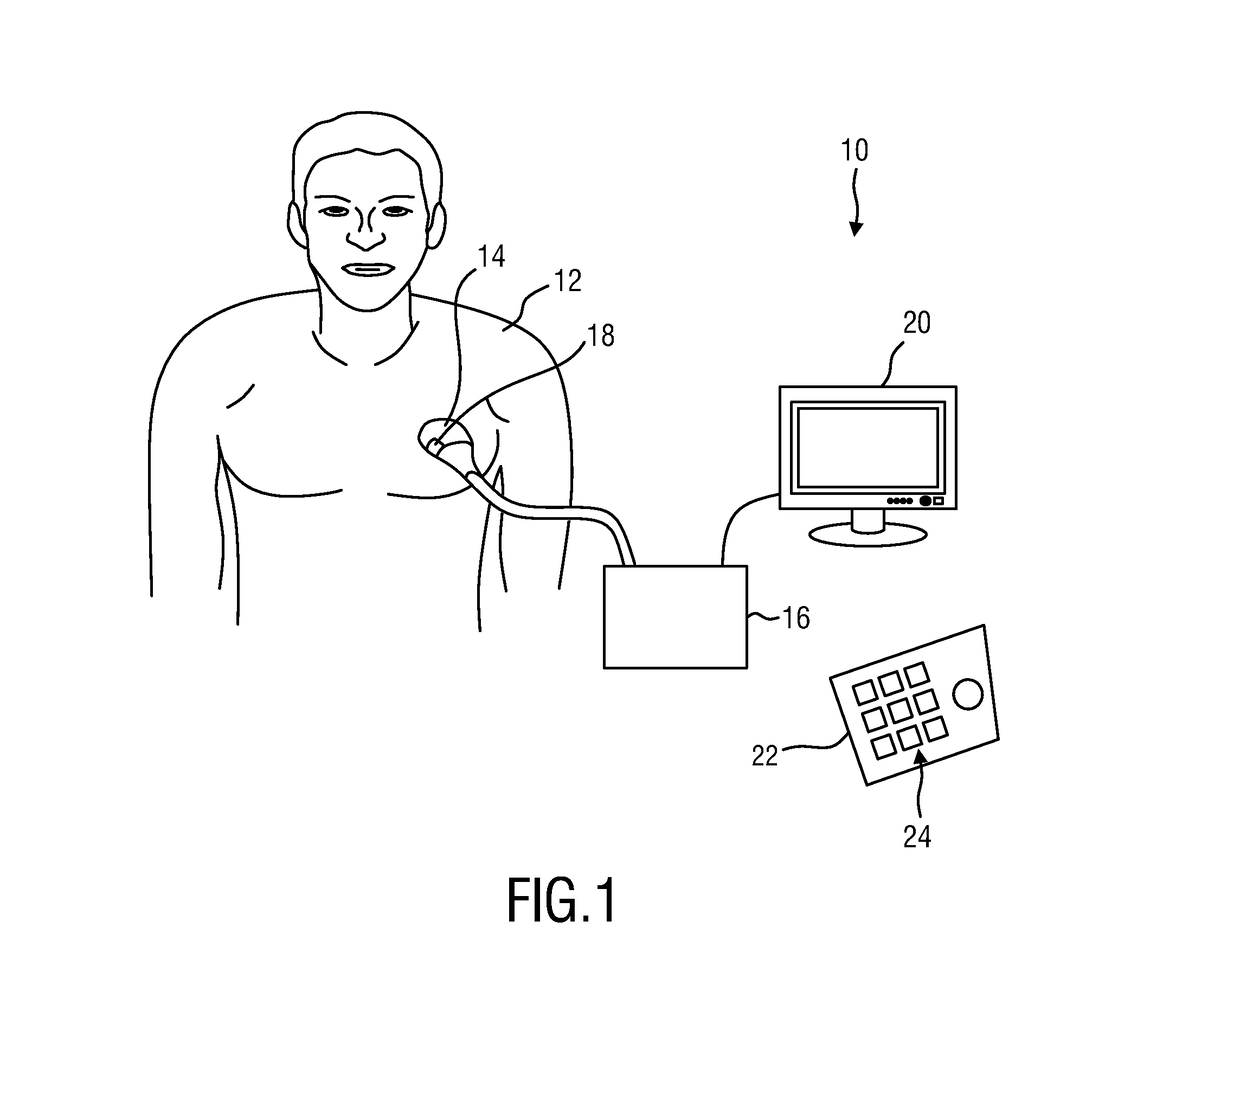 Ultrasound imaging apparatus and method for segmenting anatomical objects